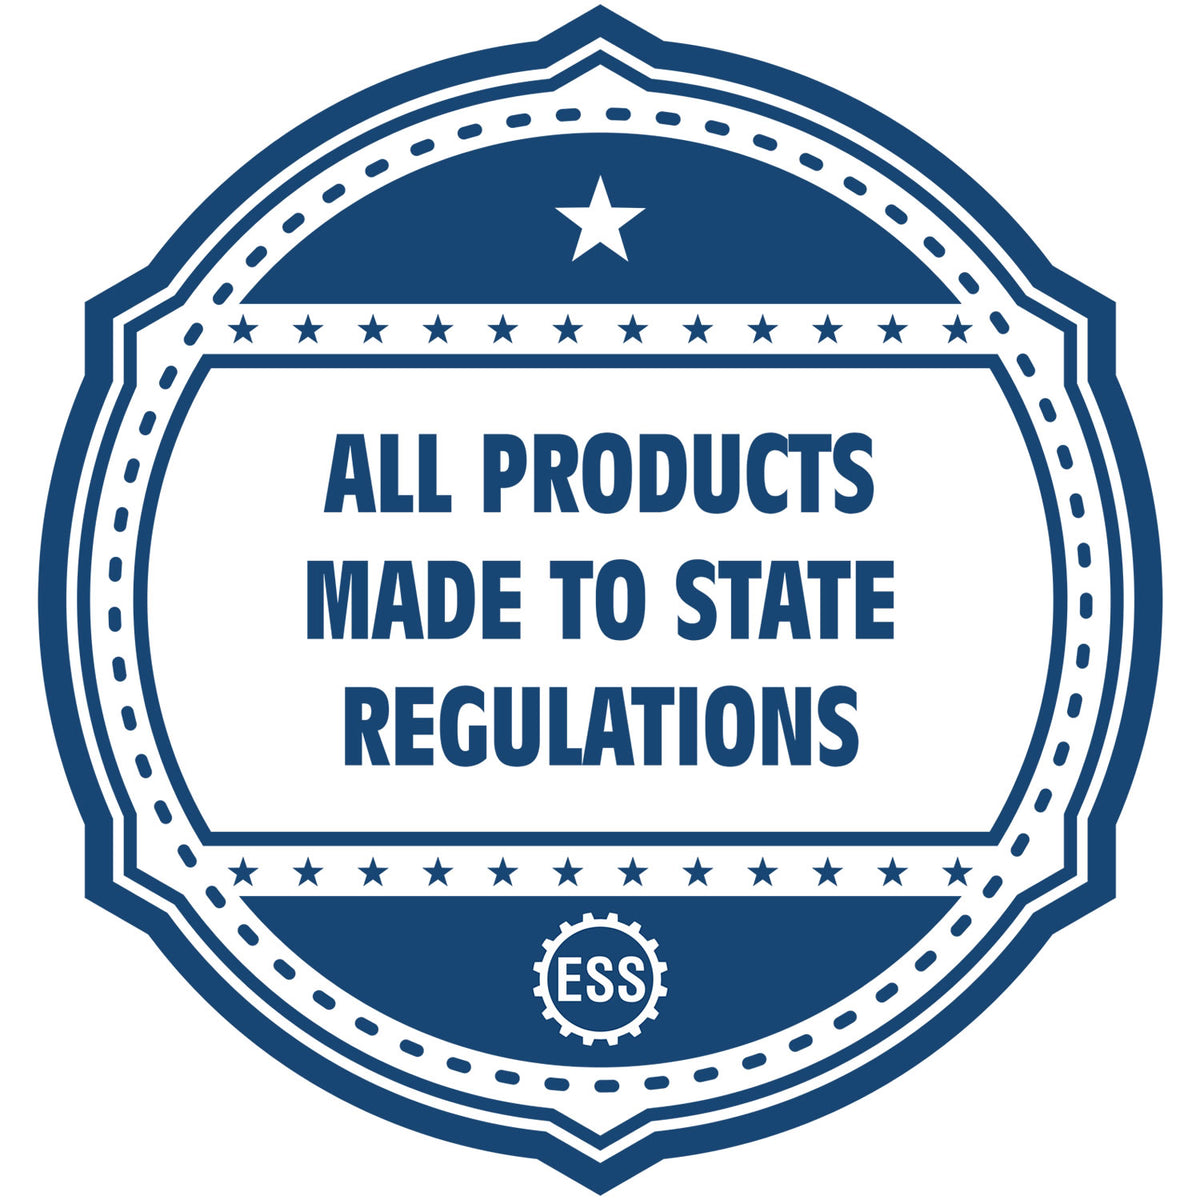 An icon or badge element for the Slim Pre-Inked Nebraska Land Surveyor Seal Stamp showing that this product is made in compliance with state regulations.